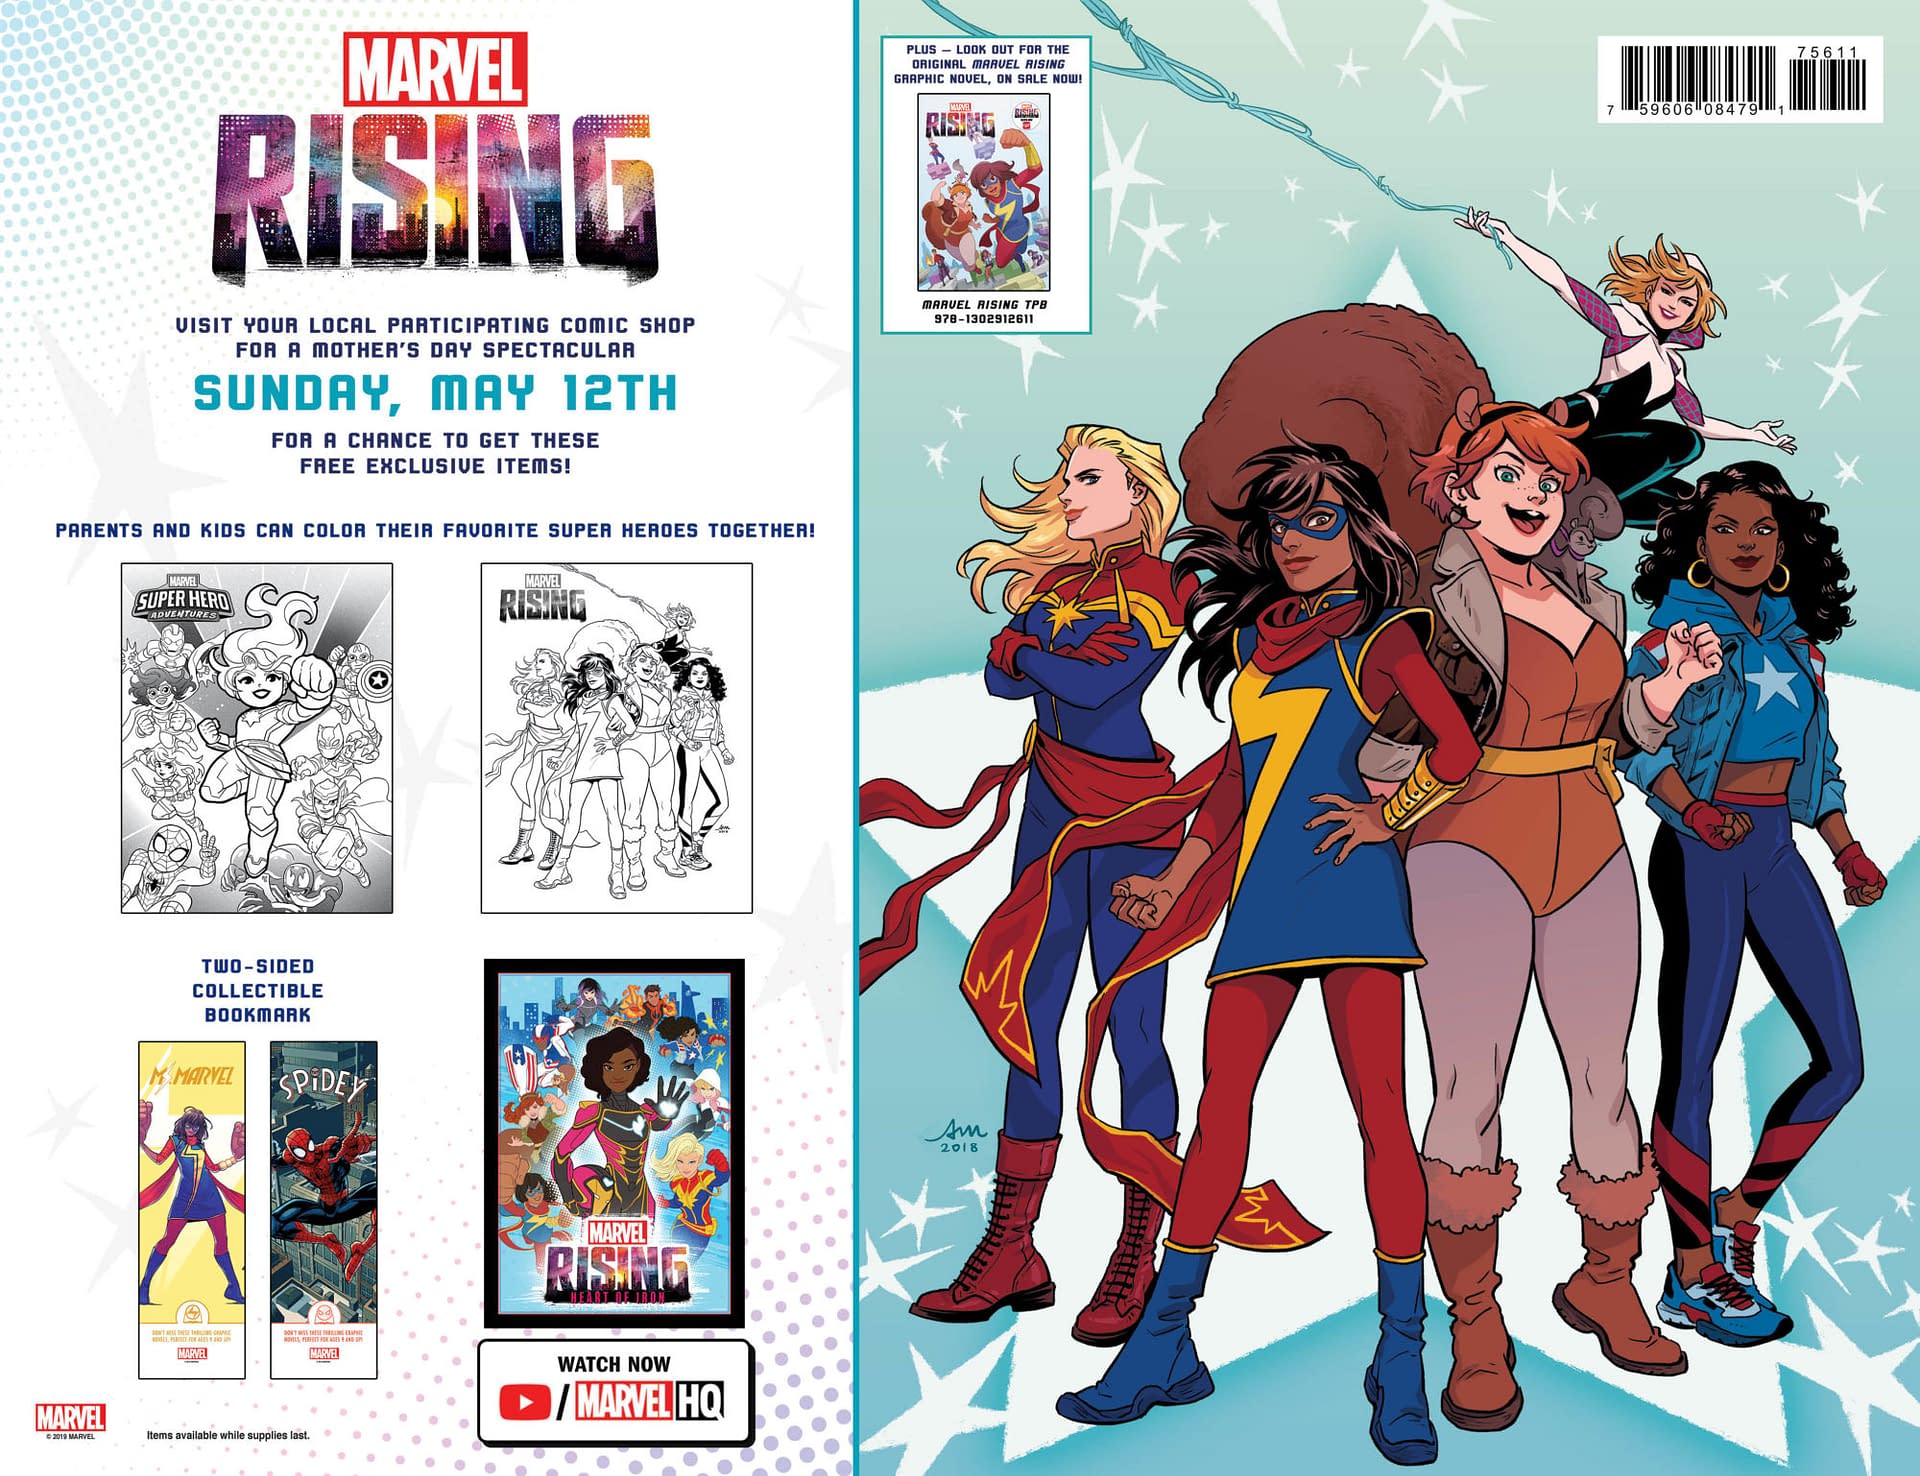 Marvel Reveals Details on Mother's Day Event at Local Comic Shops